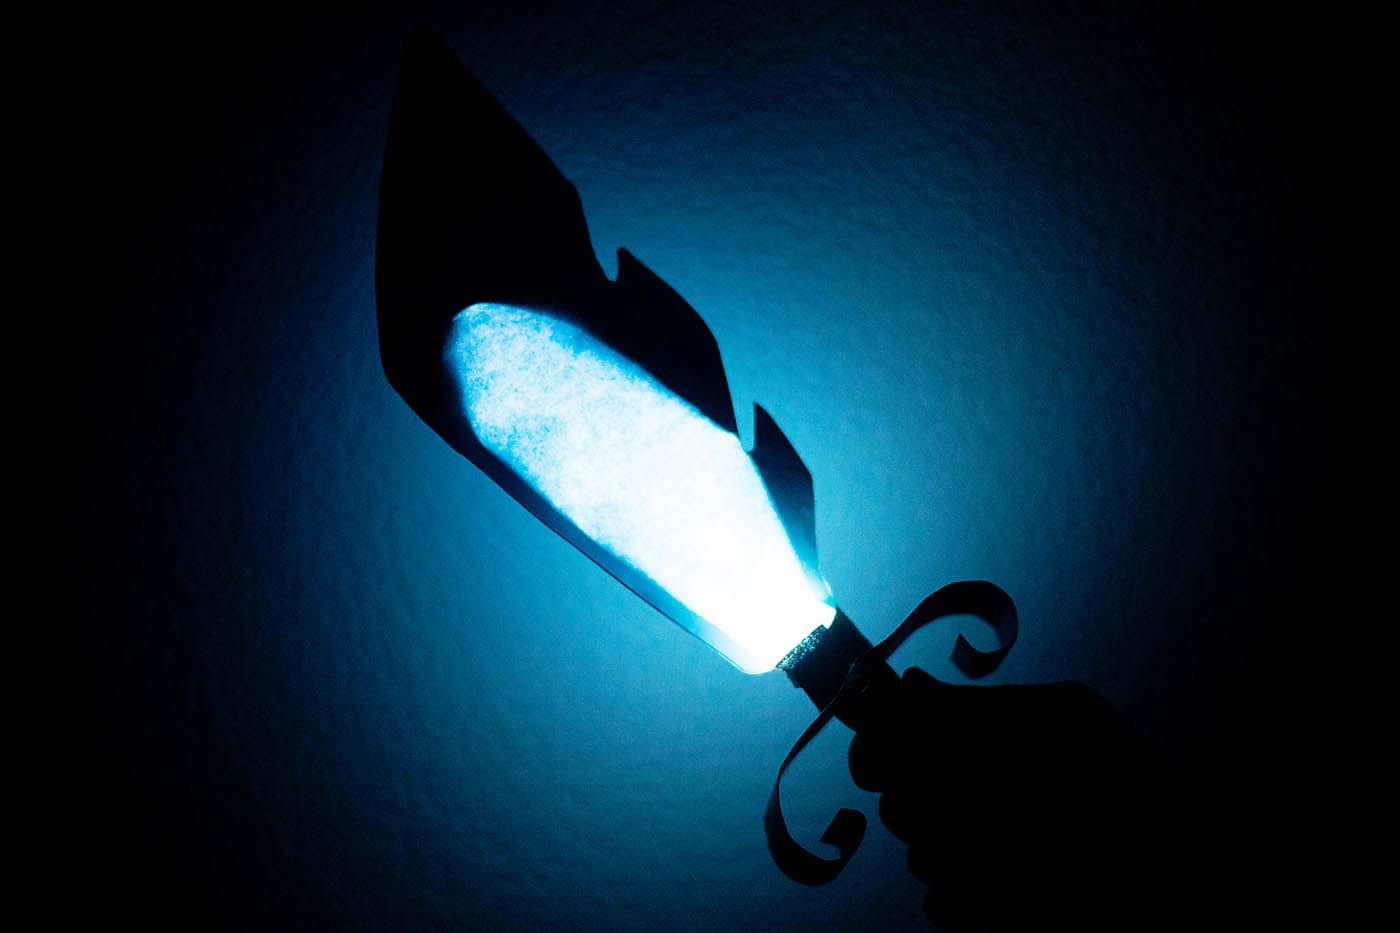 DIY light up sword inspired by the Amazon original series Niko and the Sword of Light